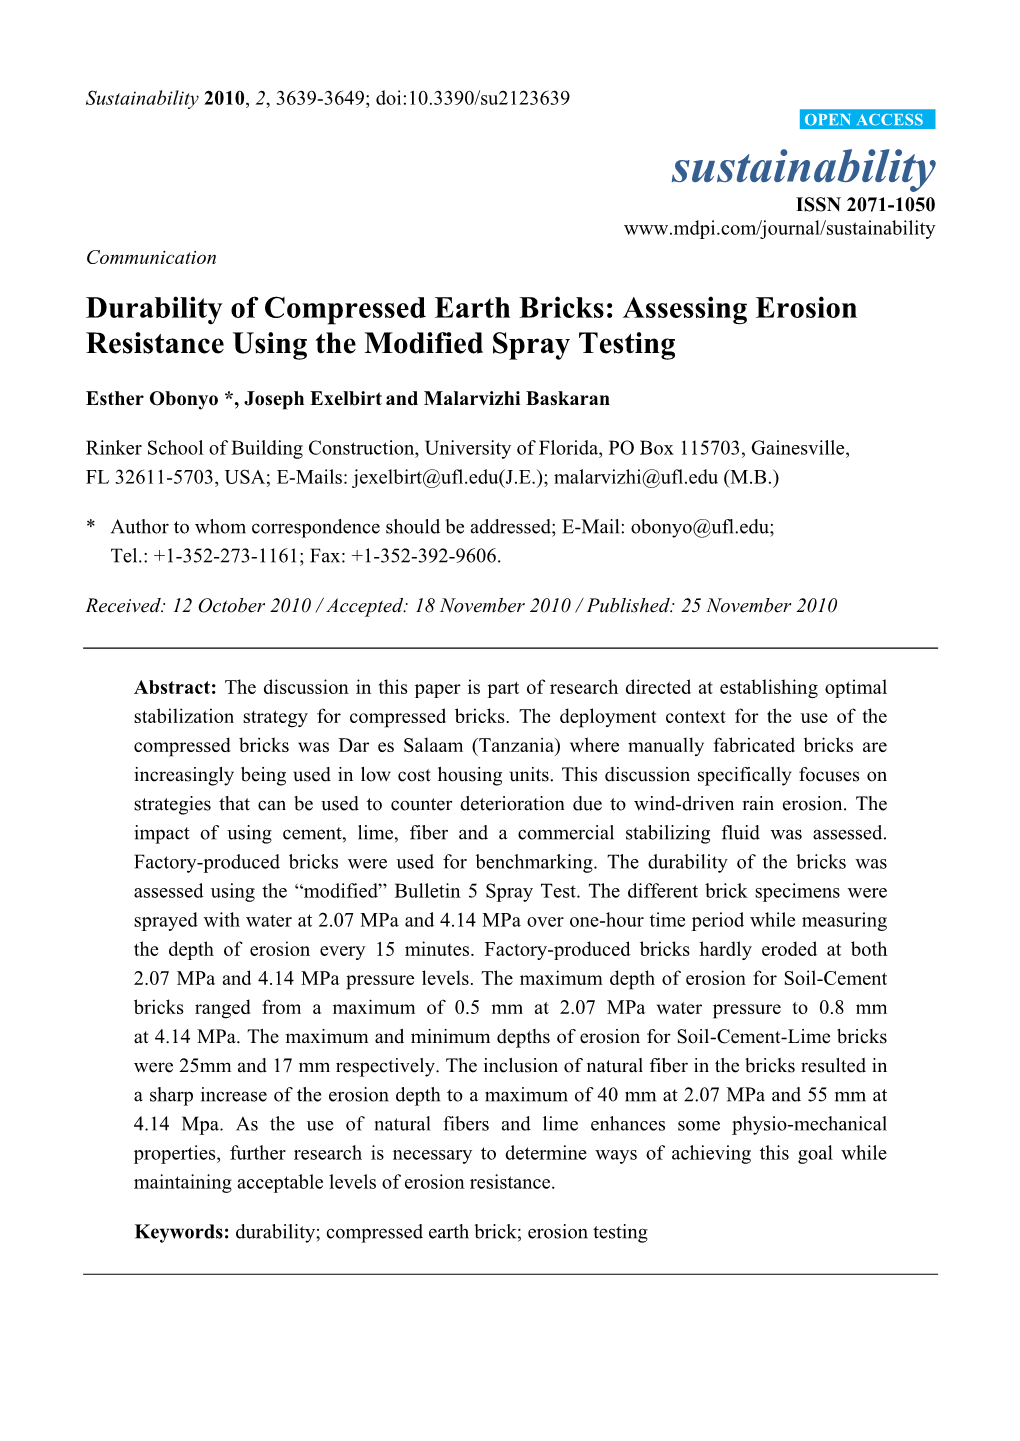 Durability of Compressed Earth Bricks: Assessing Erosion Resistance Using the Modified Spray Testing